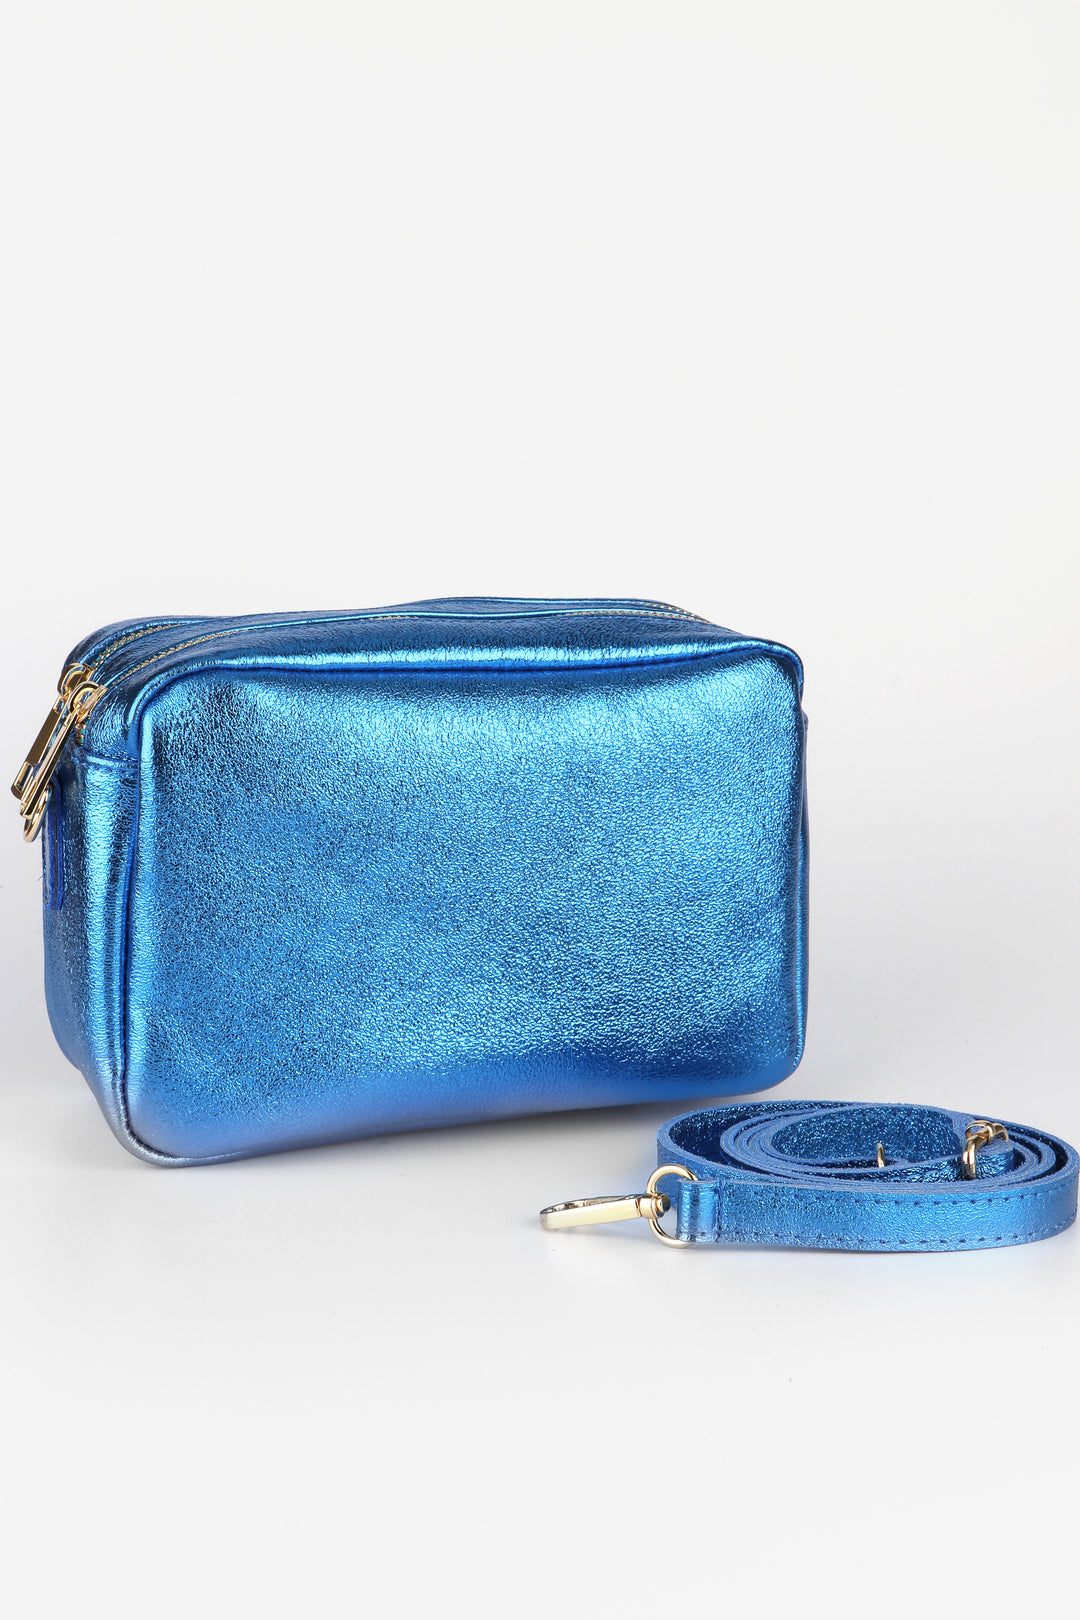 metallic blue leather cross body camera bag with dual zip closure compartments and a detachable matching clip on bag strap